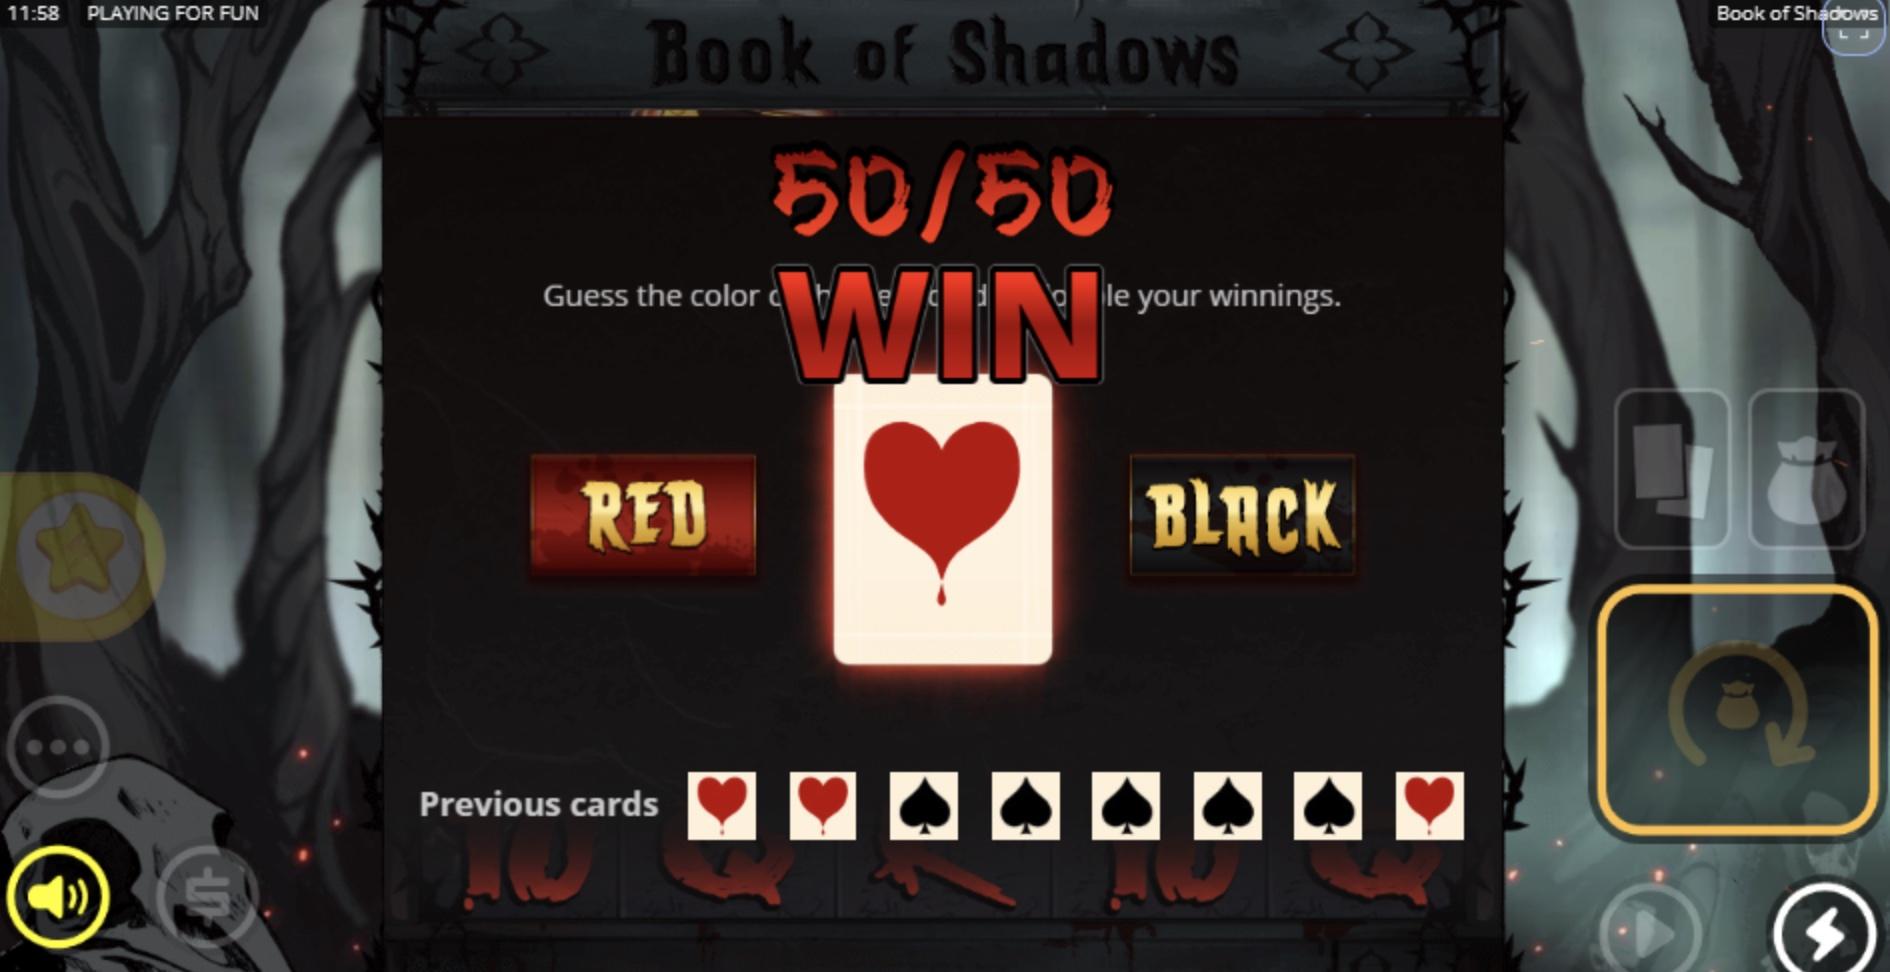 Book of Shadows Slot Features